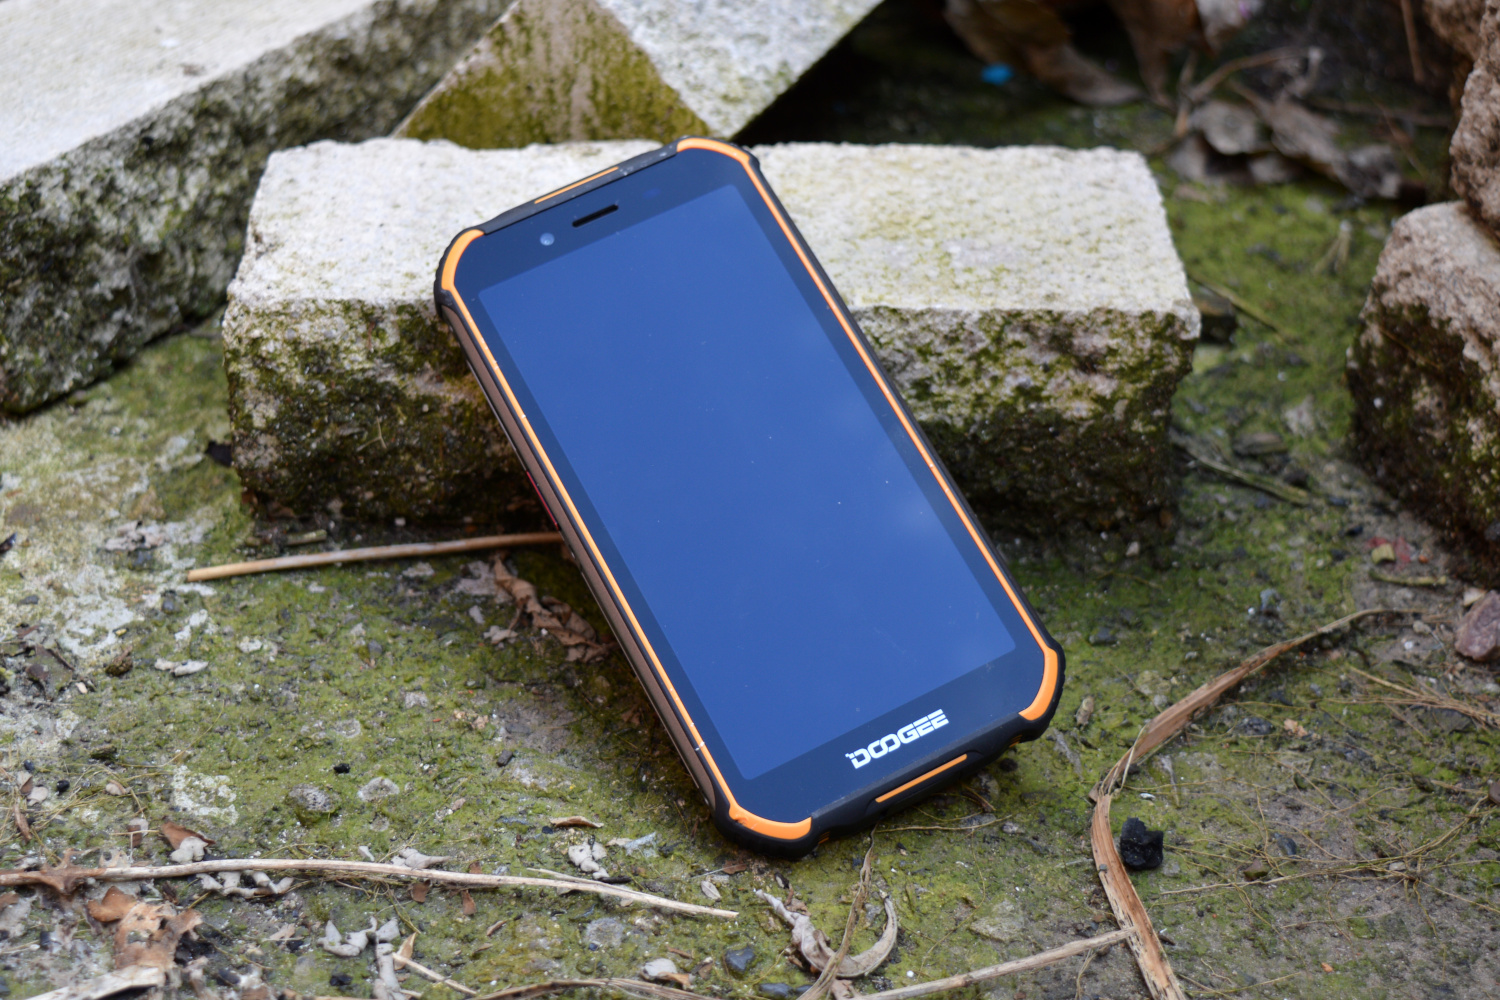 doogee s40 review sssh its tired and resting on a stone